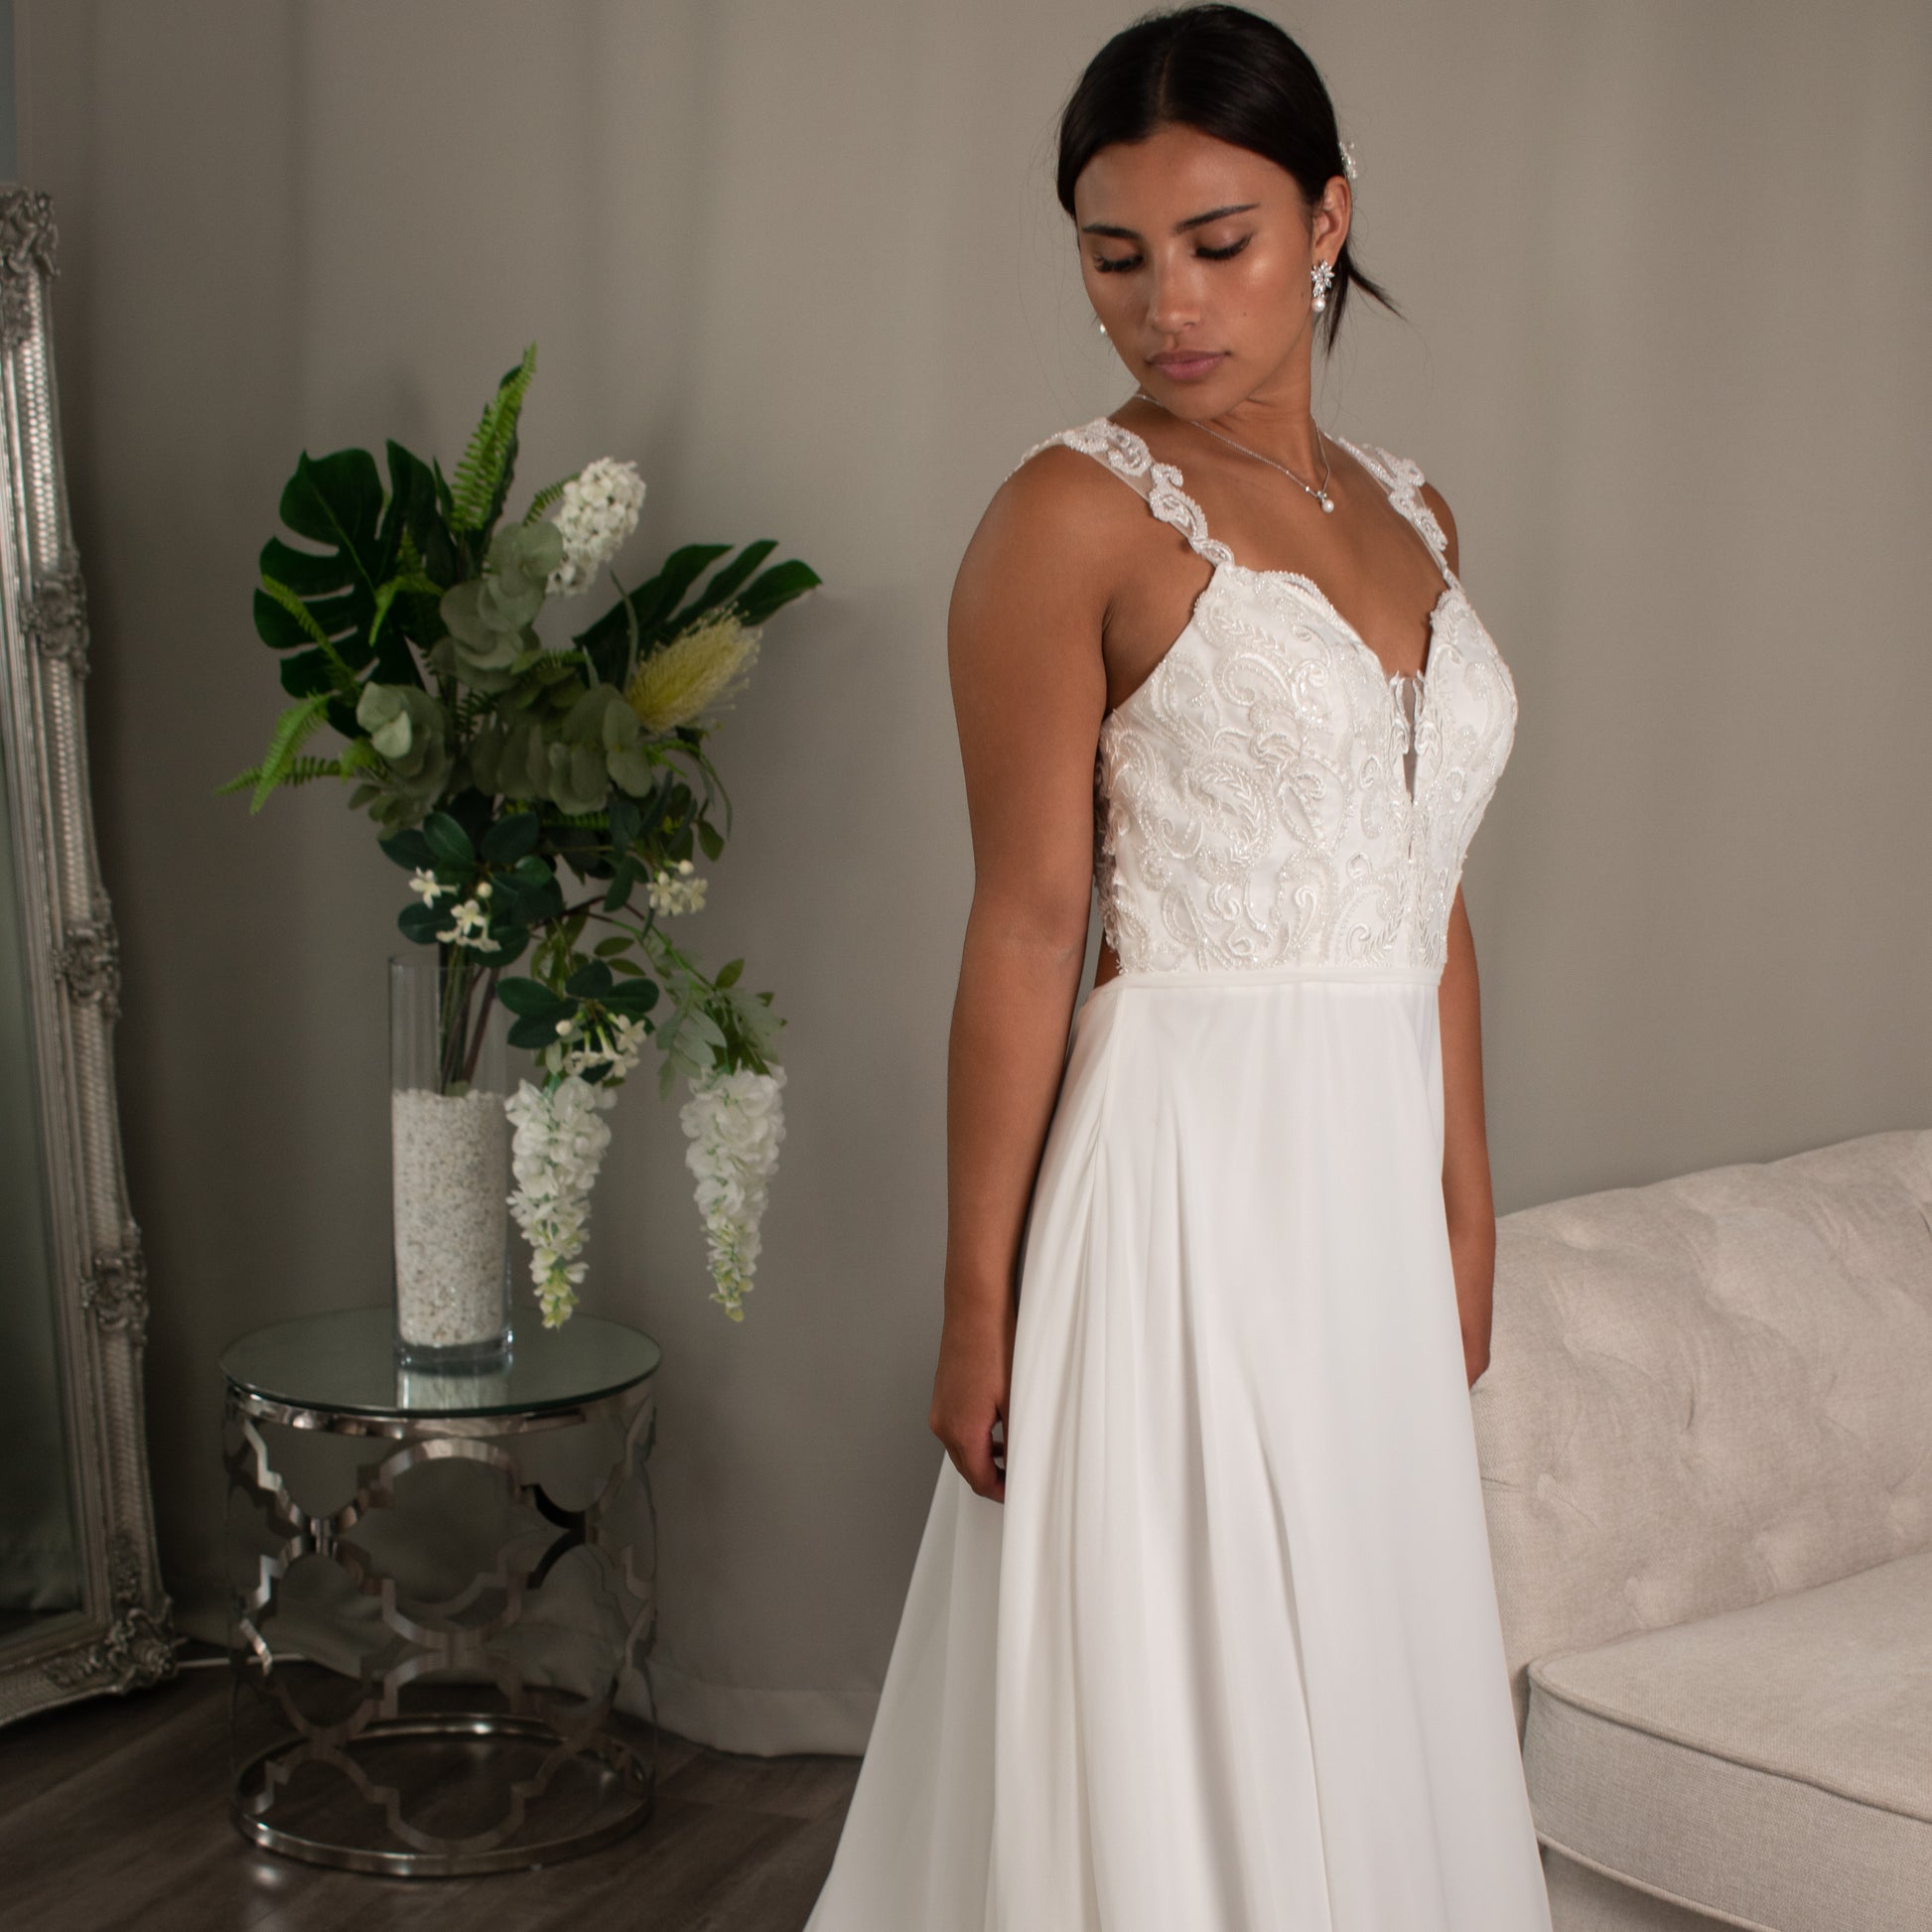 Evelyn A-line Bridal Gown with Lace Bodice by Divine Bridal.